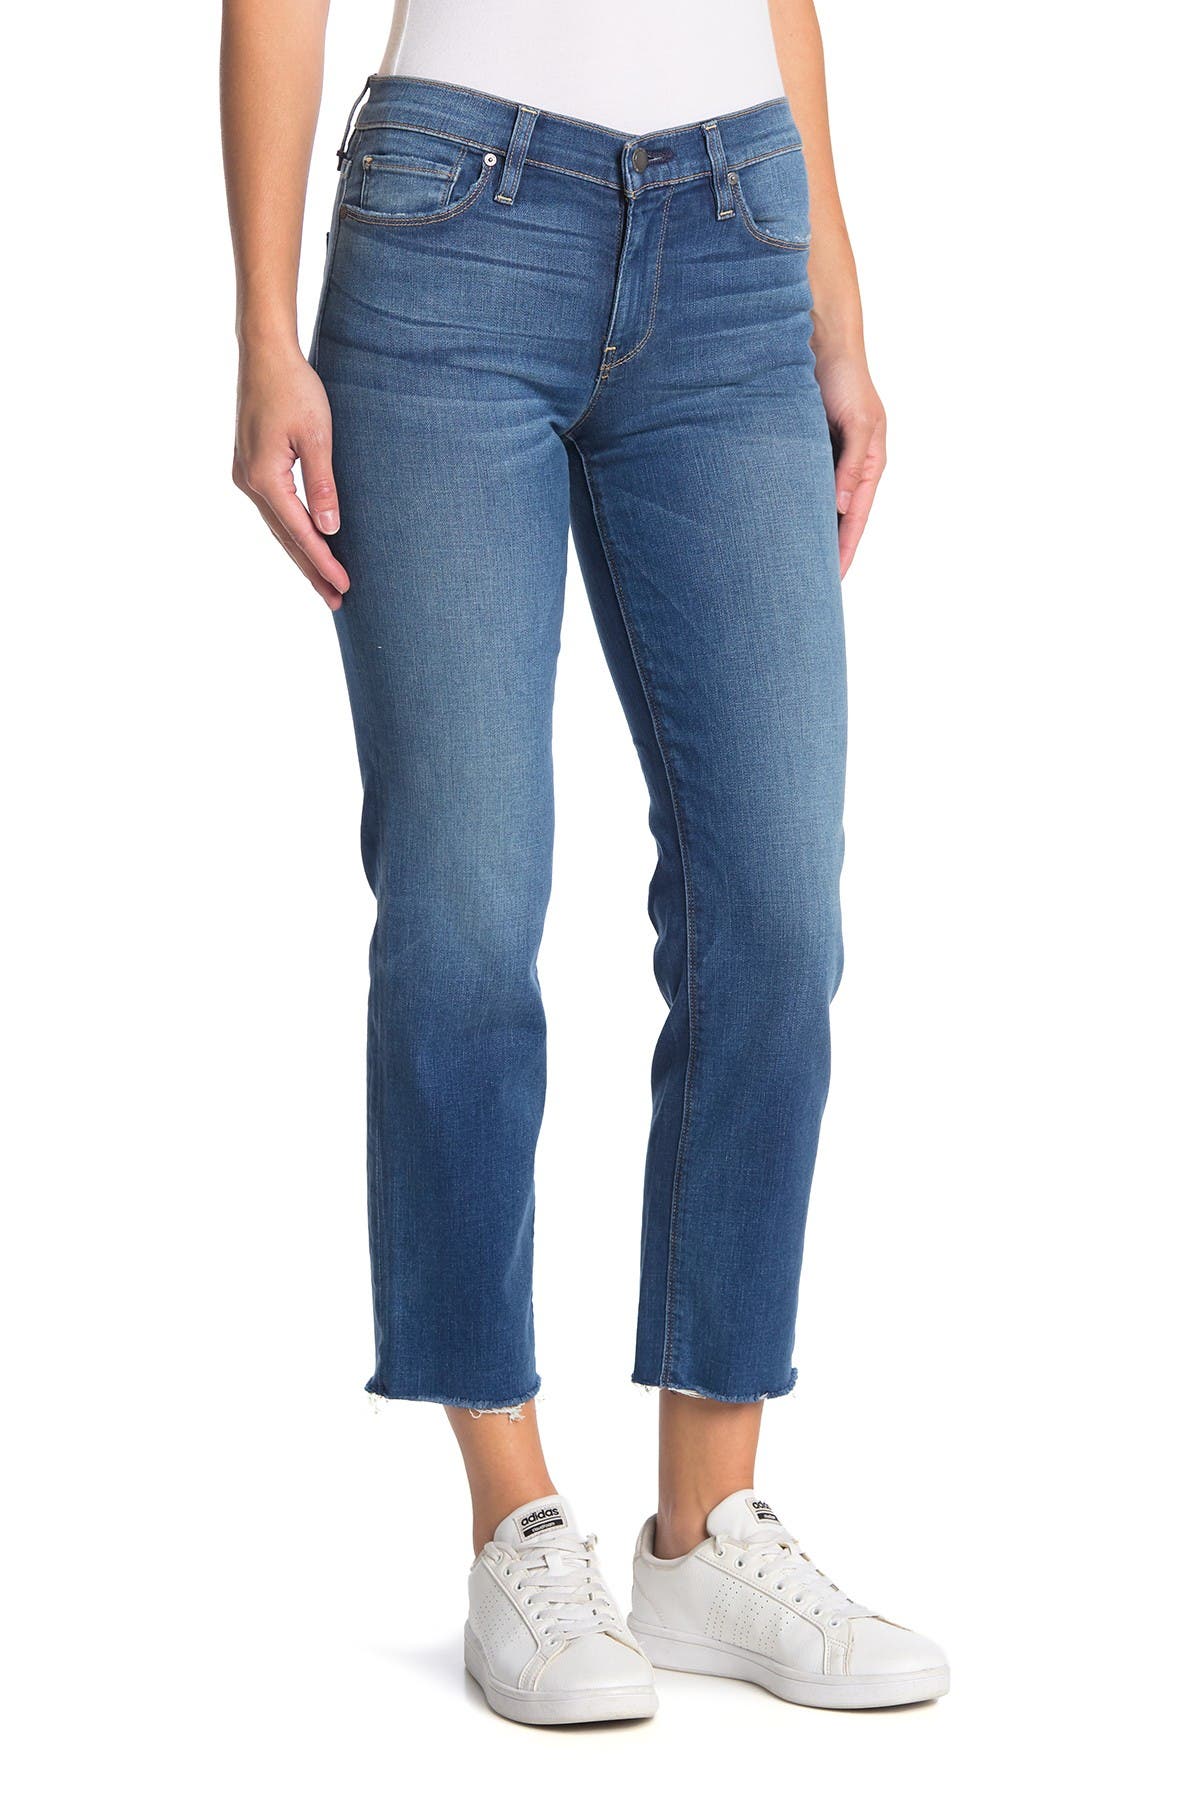 HUDSON Jeans | Nico Mid Rise Cropped Straight Leg Jeans | Nordstrom Rack